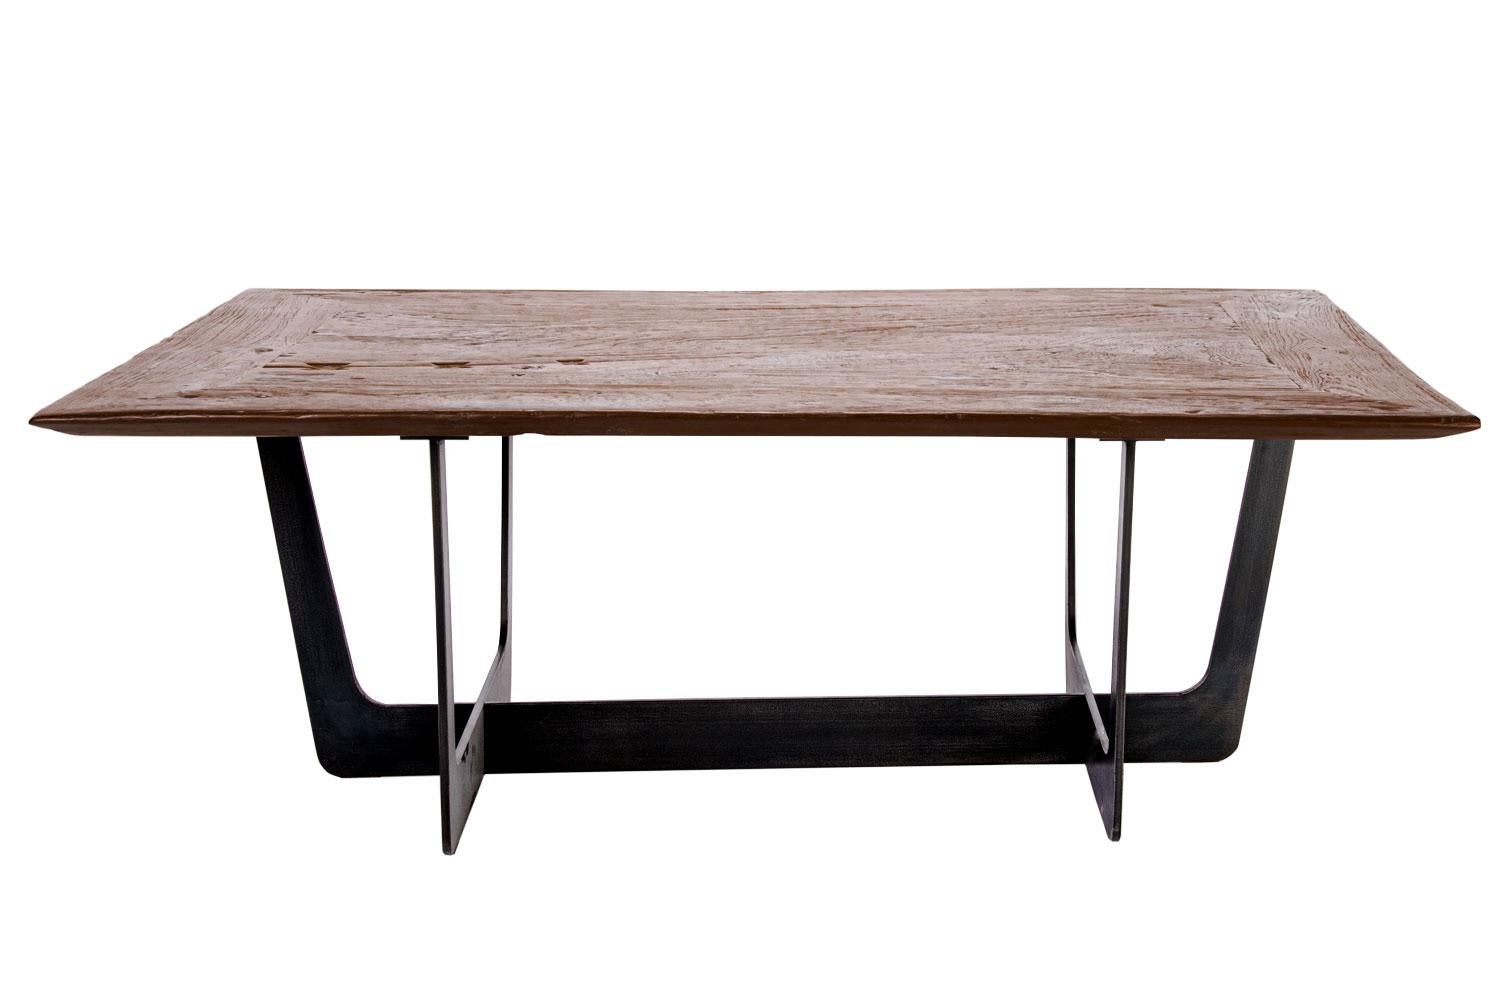 Teak top with custom iron base coffee table

This teak coffee table adds a beautiful and versatile layer into a variety of interior setting. With a generous surface area, it pairs well with modern, large sectionals. The tabletop is a re-purposed